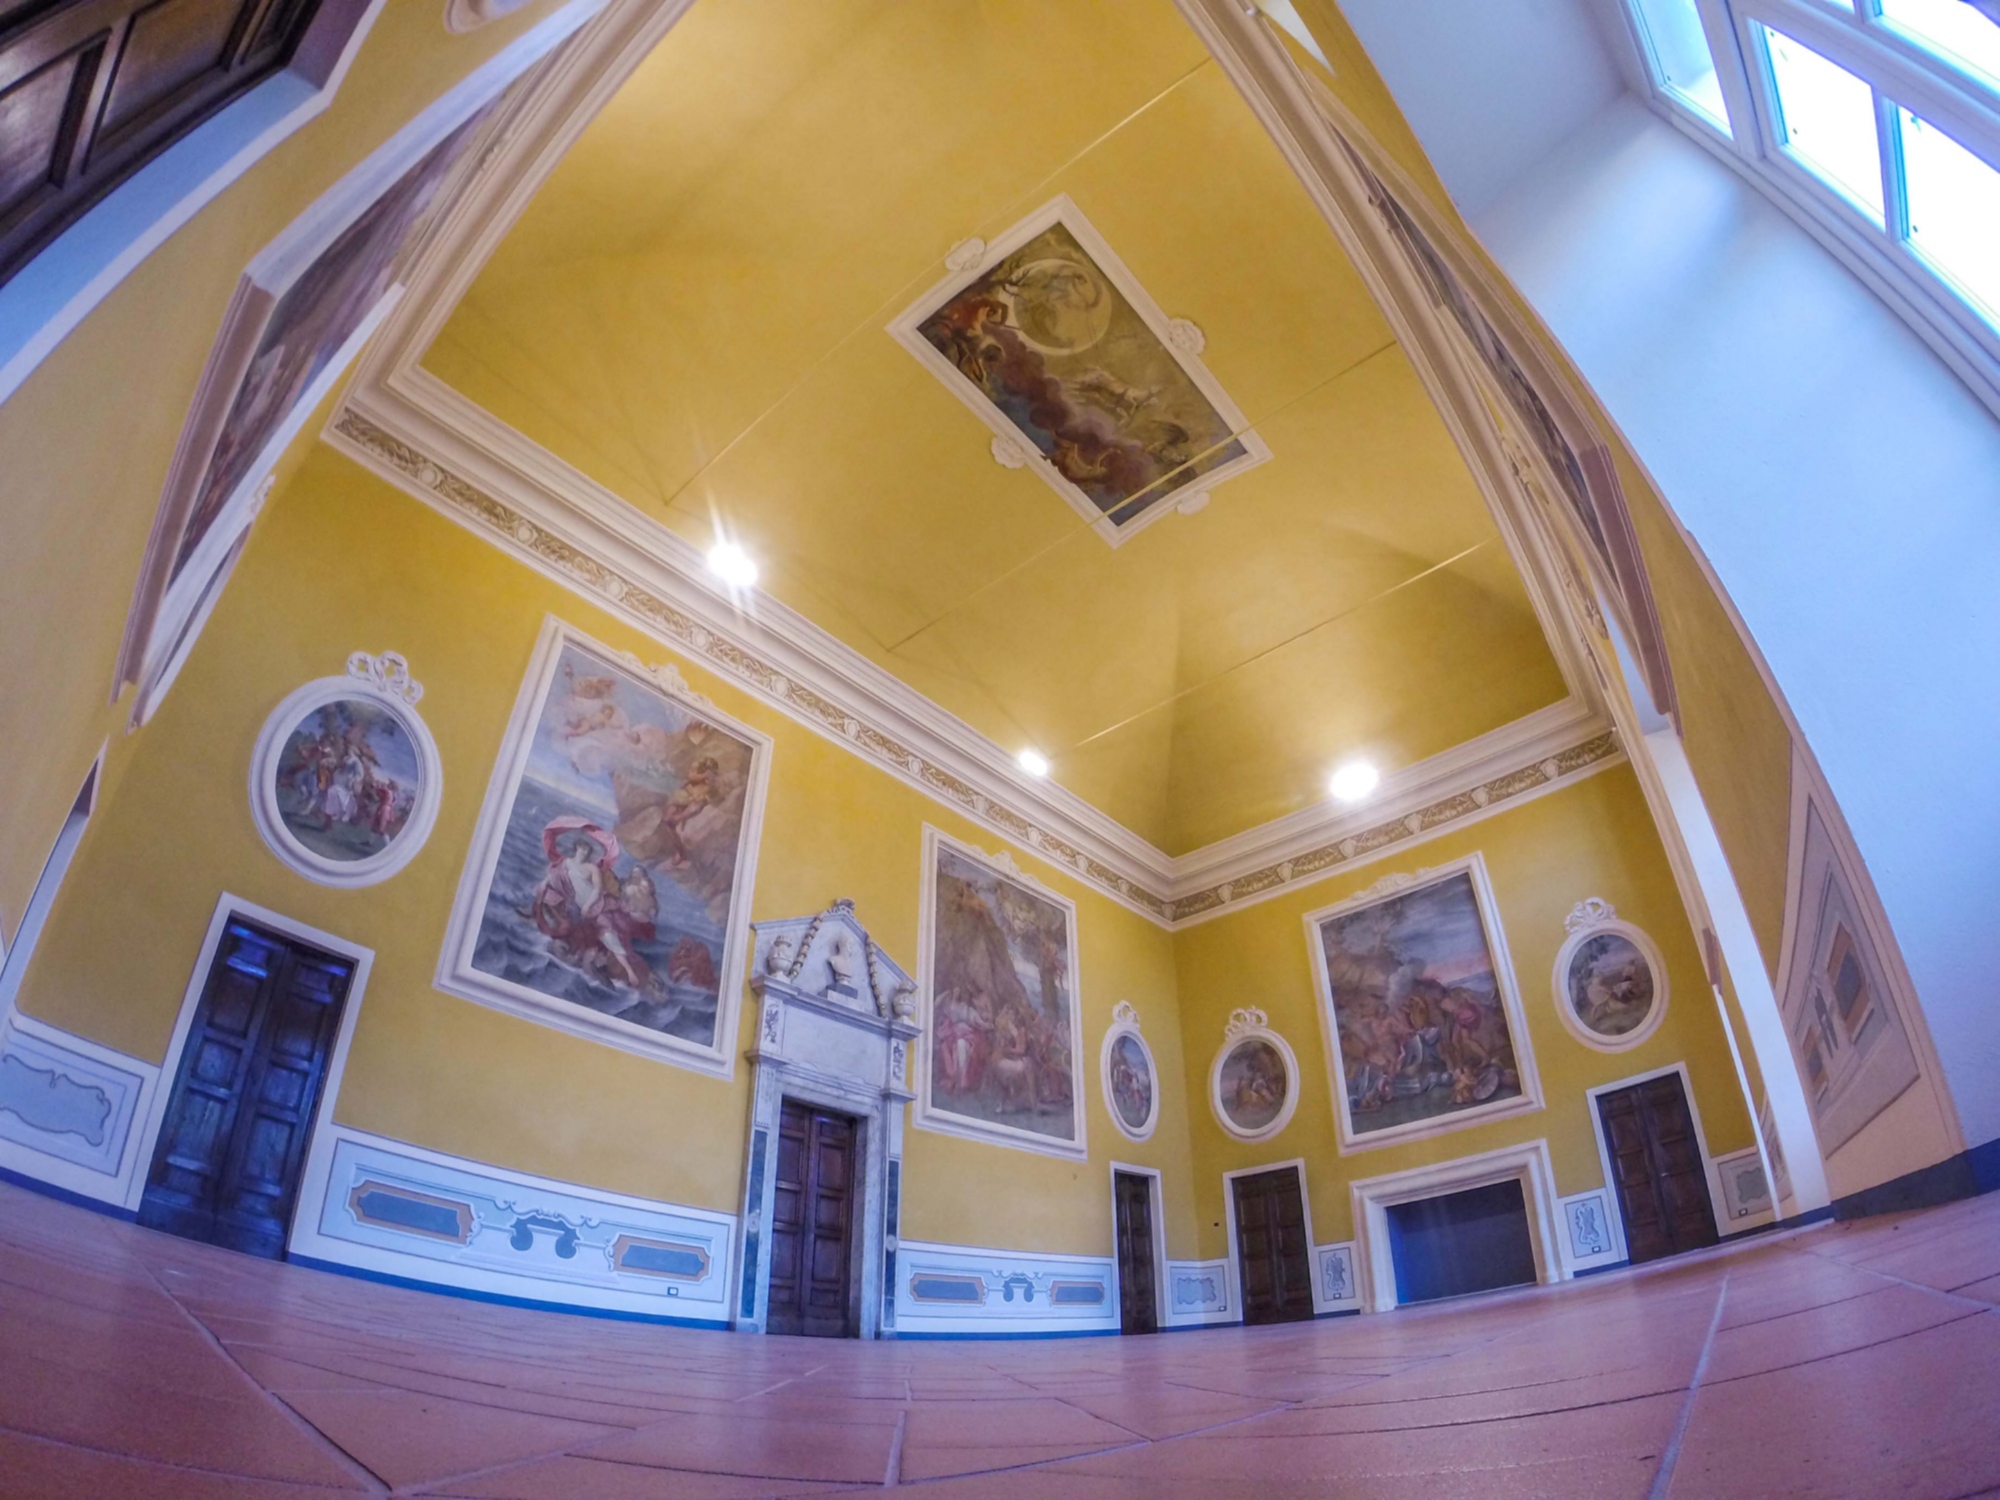 The hall of the Pallerone Castle - Aulla